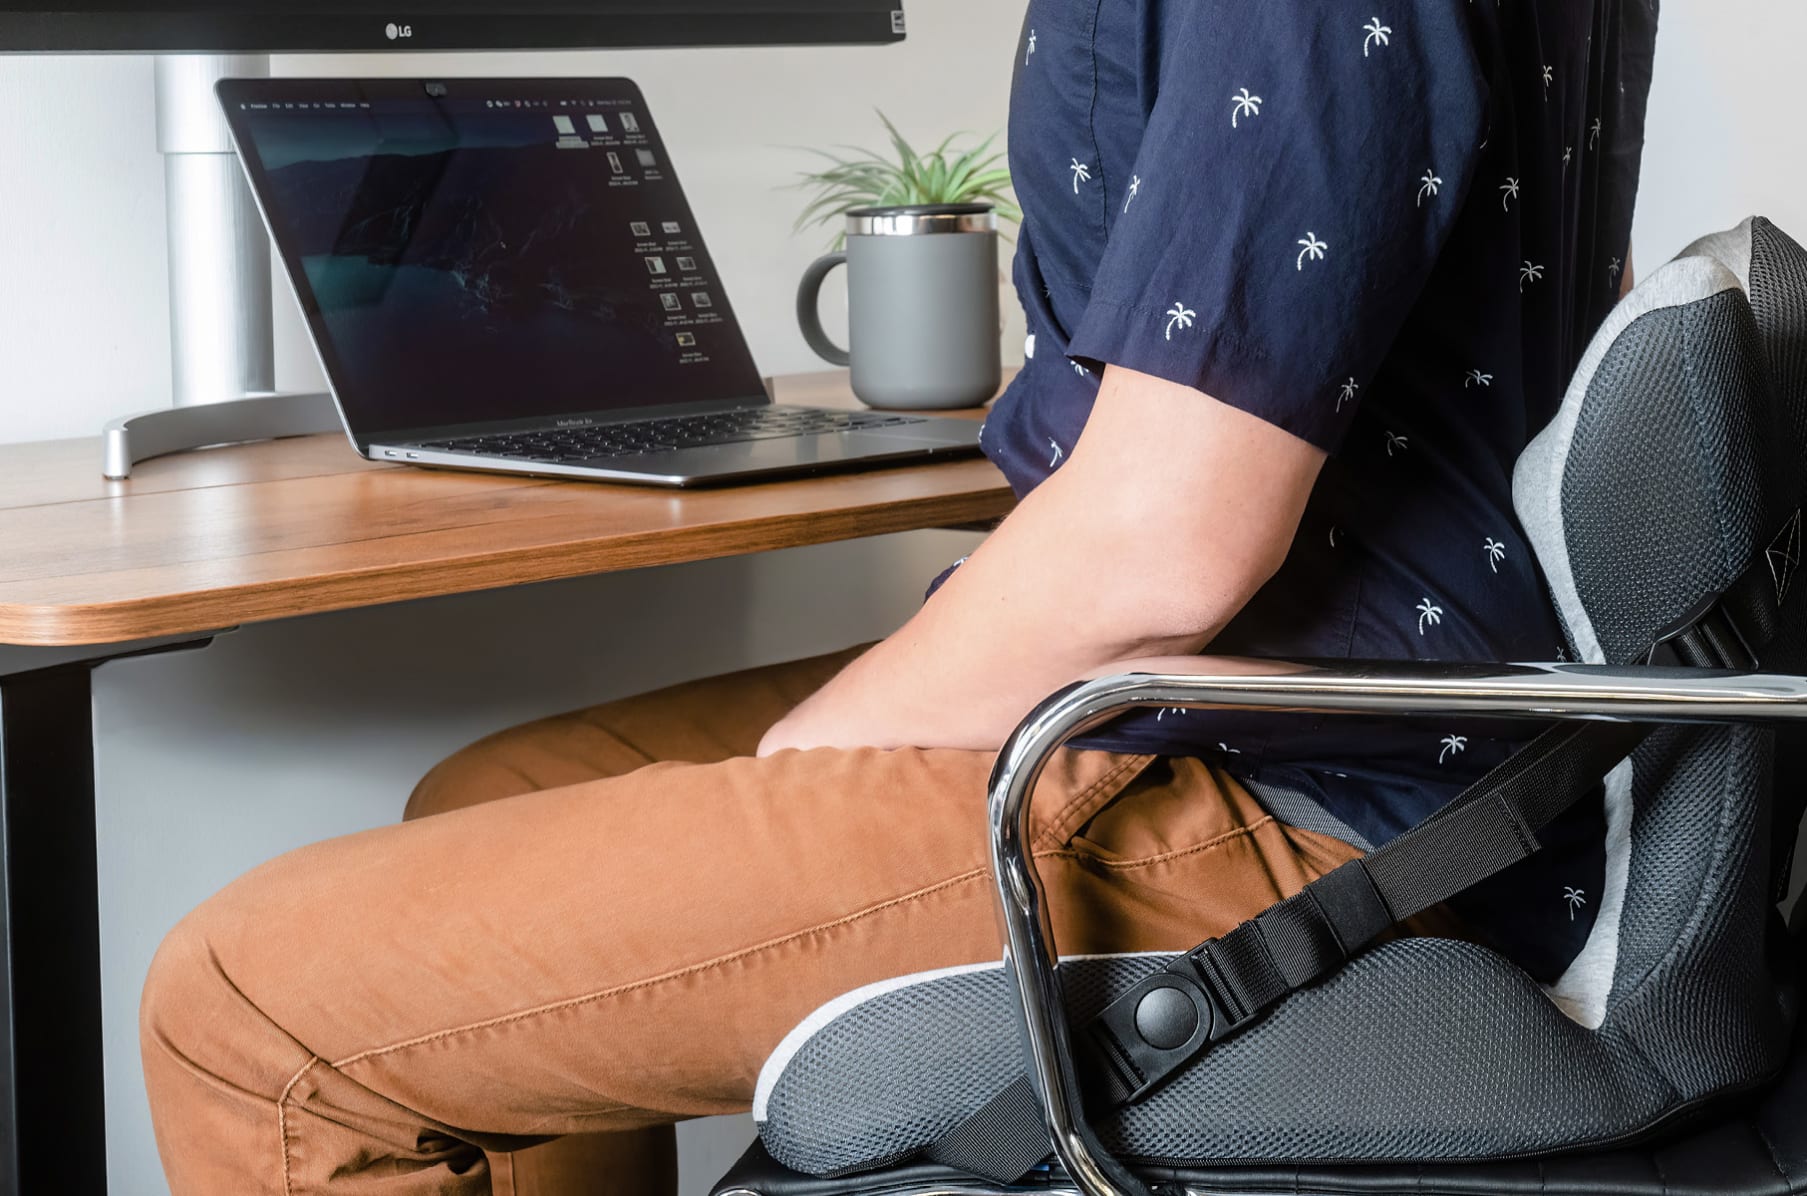 Lifted Lumbar: Doctor-Made Seat Cushion for Better Posture by Dr. Aaron Fu,  DPT — Kickstarter